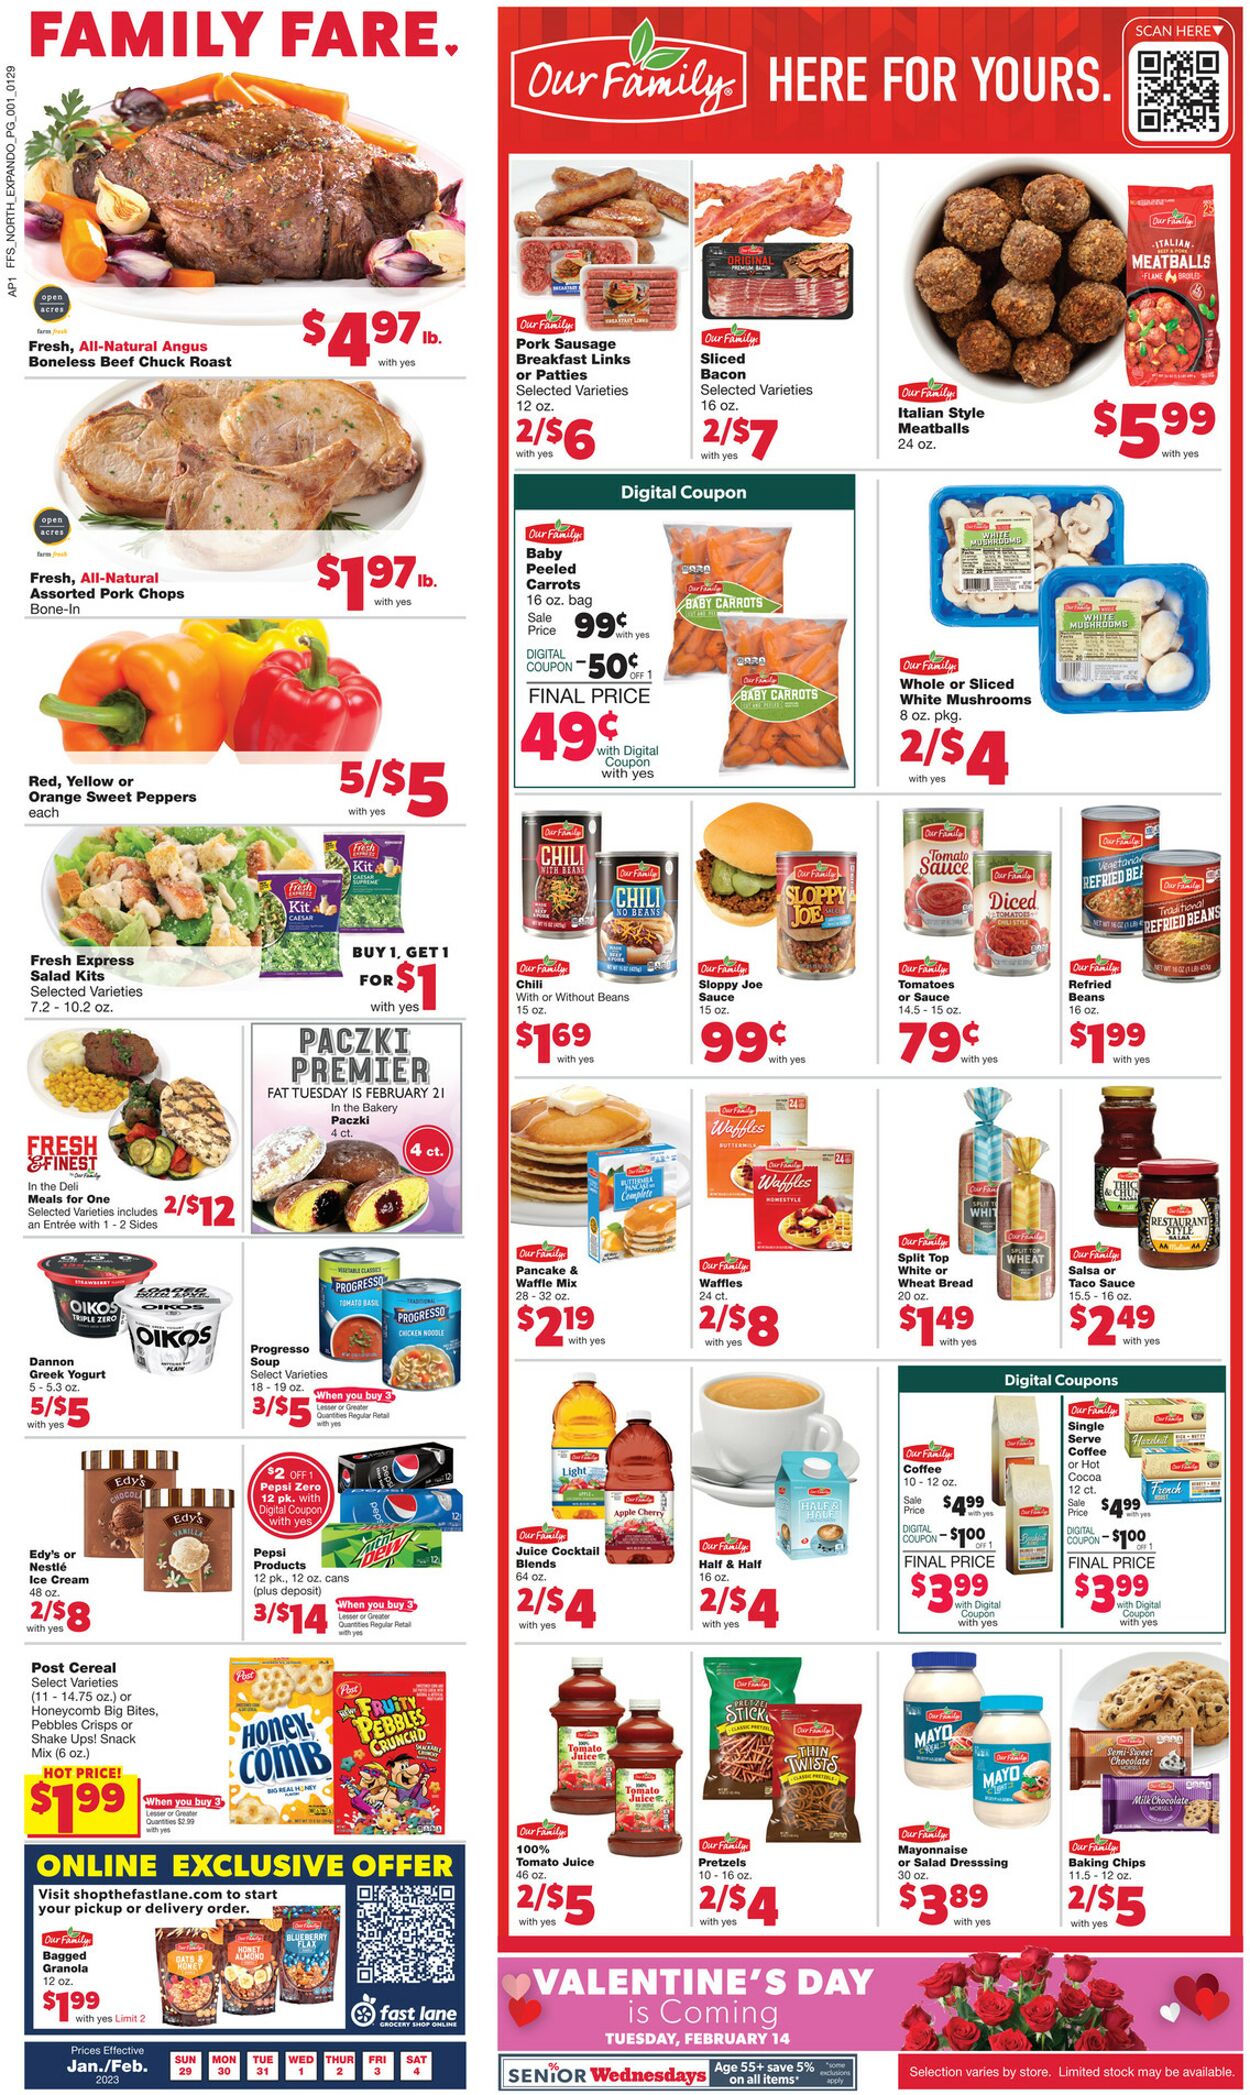 Family Fare Promotional weekly ads